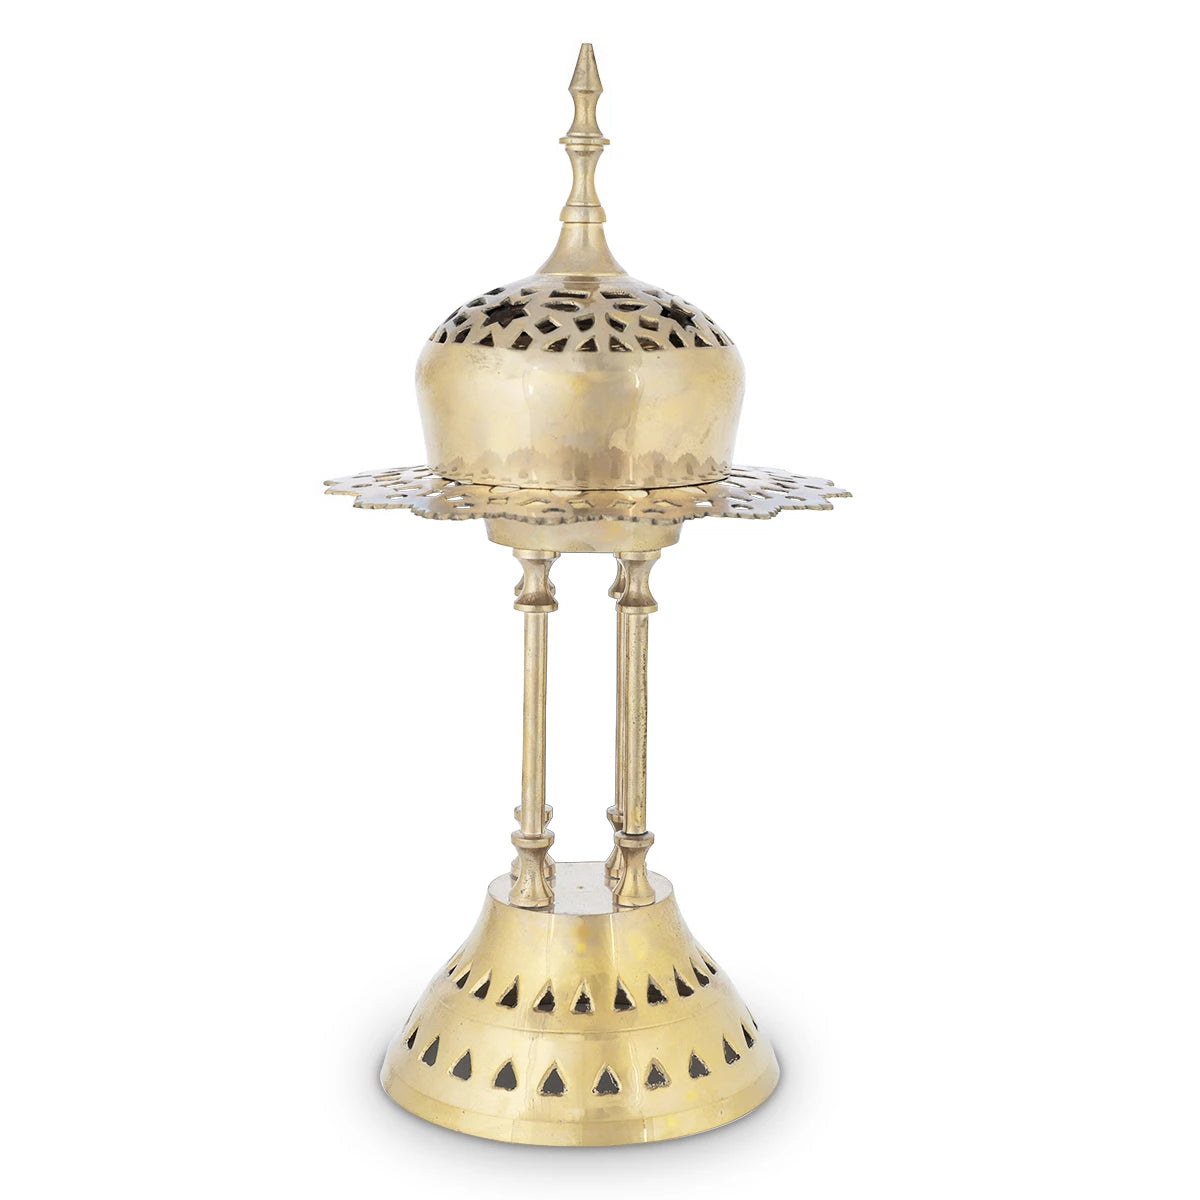 Golden Bakhur Incense Burner Made of Brass with Open Cut Works in Traditional Arabian patterns